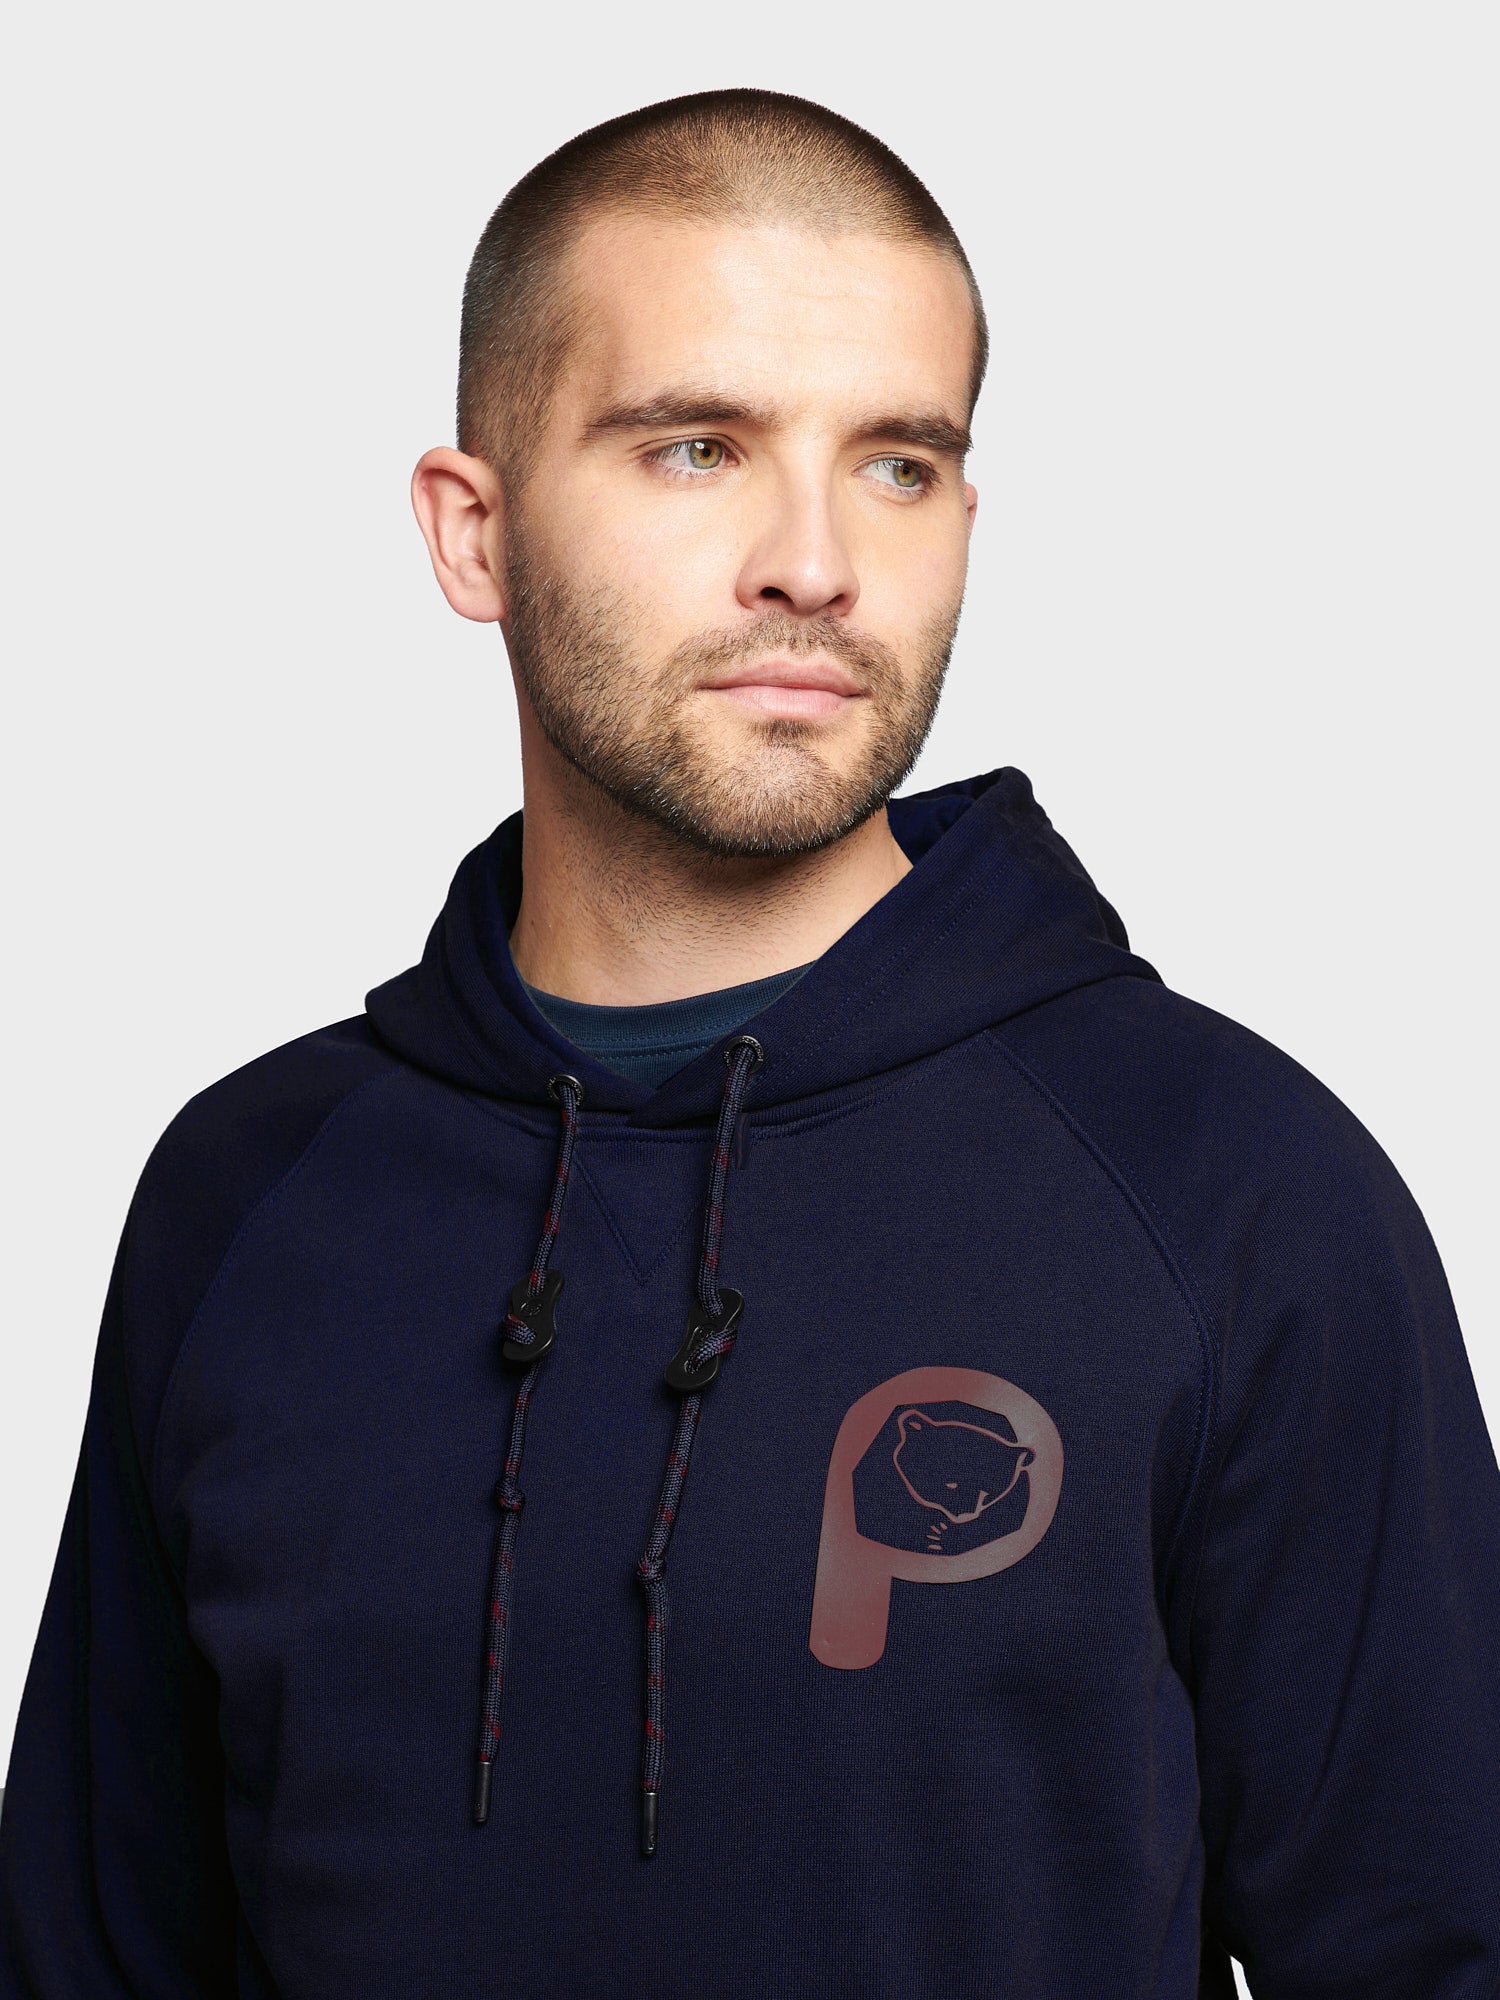 Large P Bear Chest Print Hoodie in Navy Blue